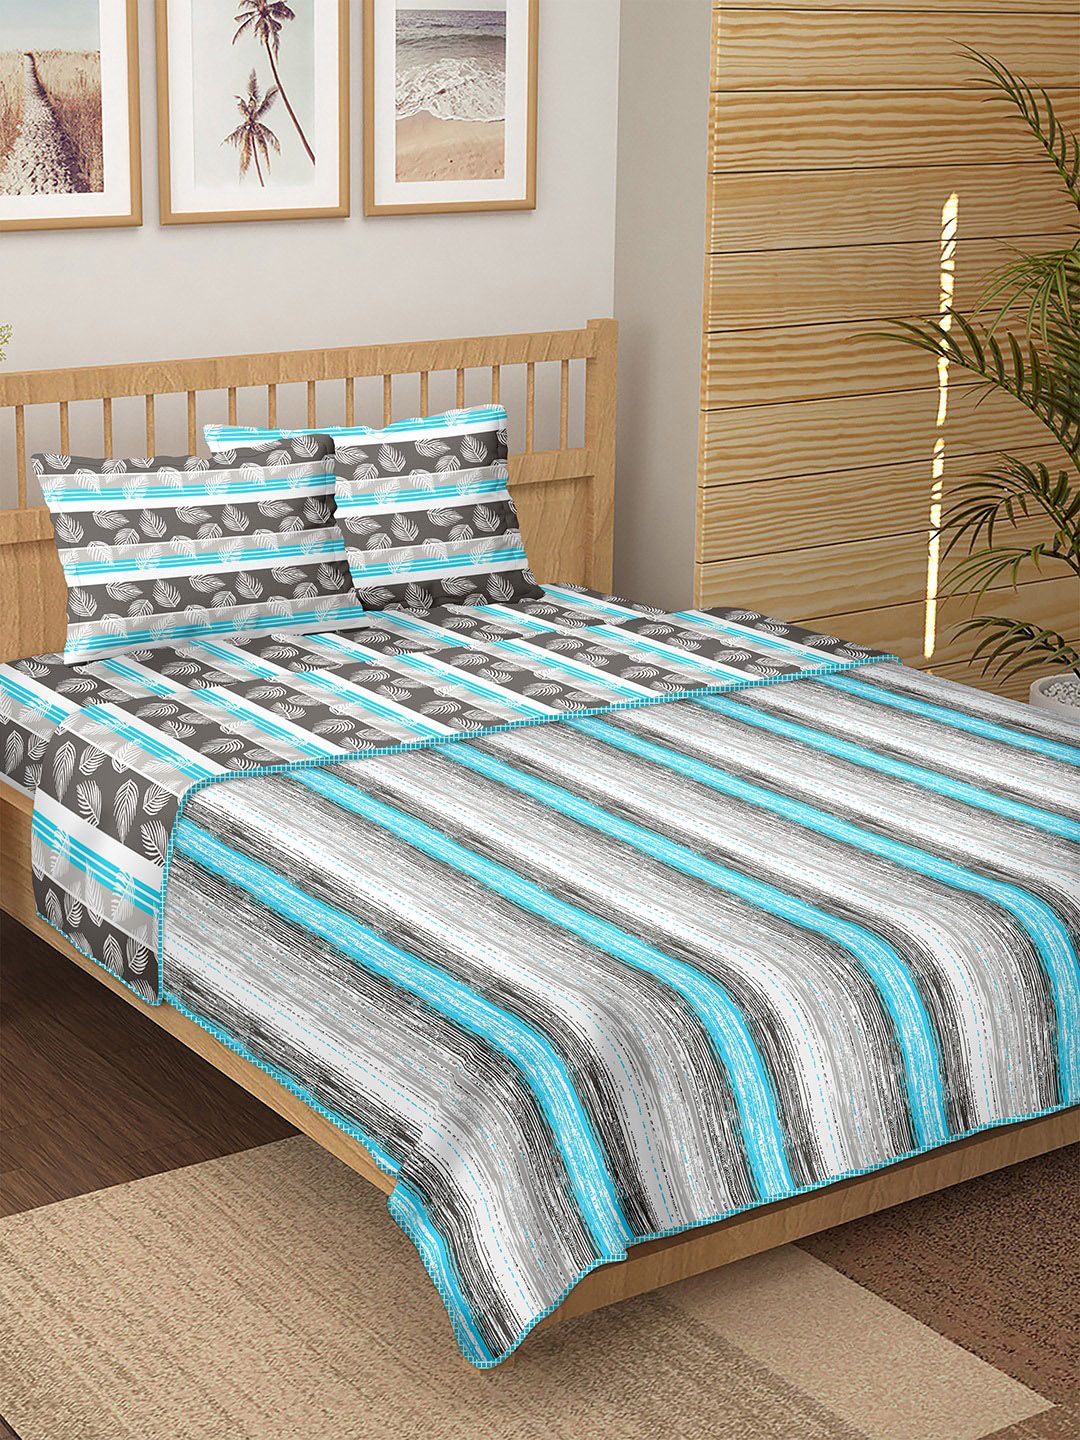 BELLA CASA Turquoise Blue & Grey Floral Printed Pure Cotton Double King 4-Piece Bedding Set Price in India